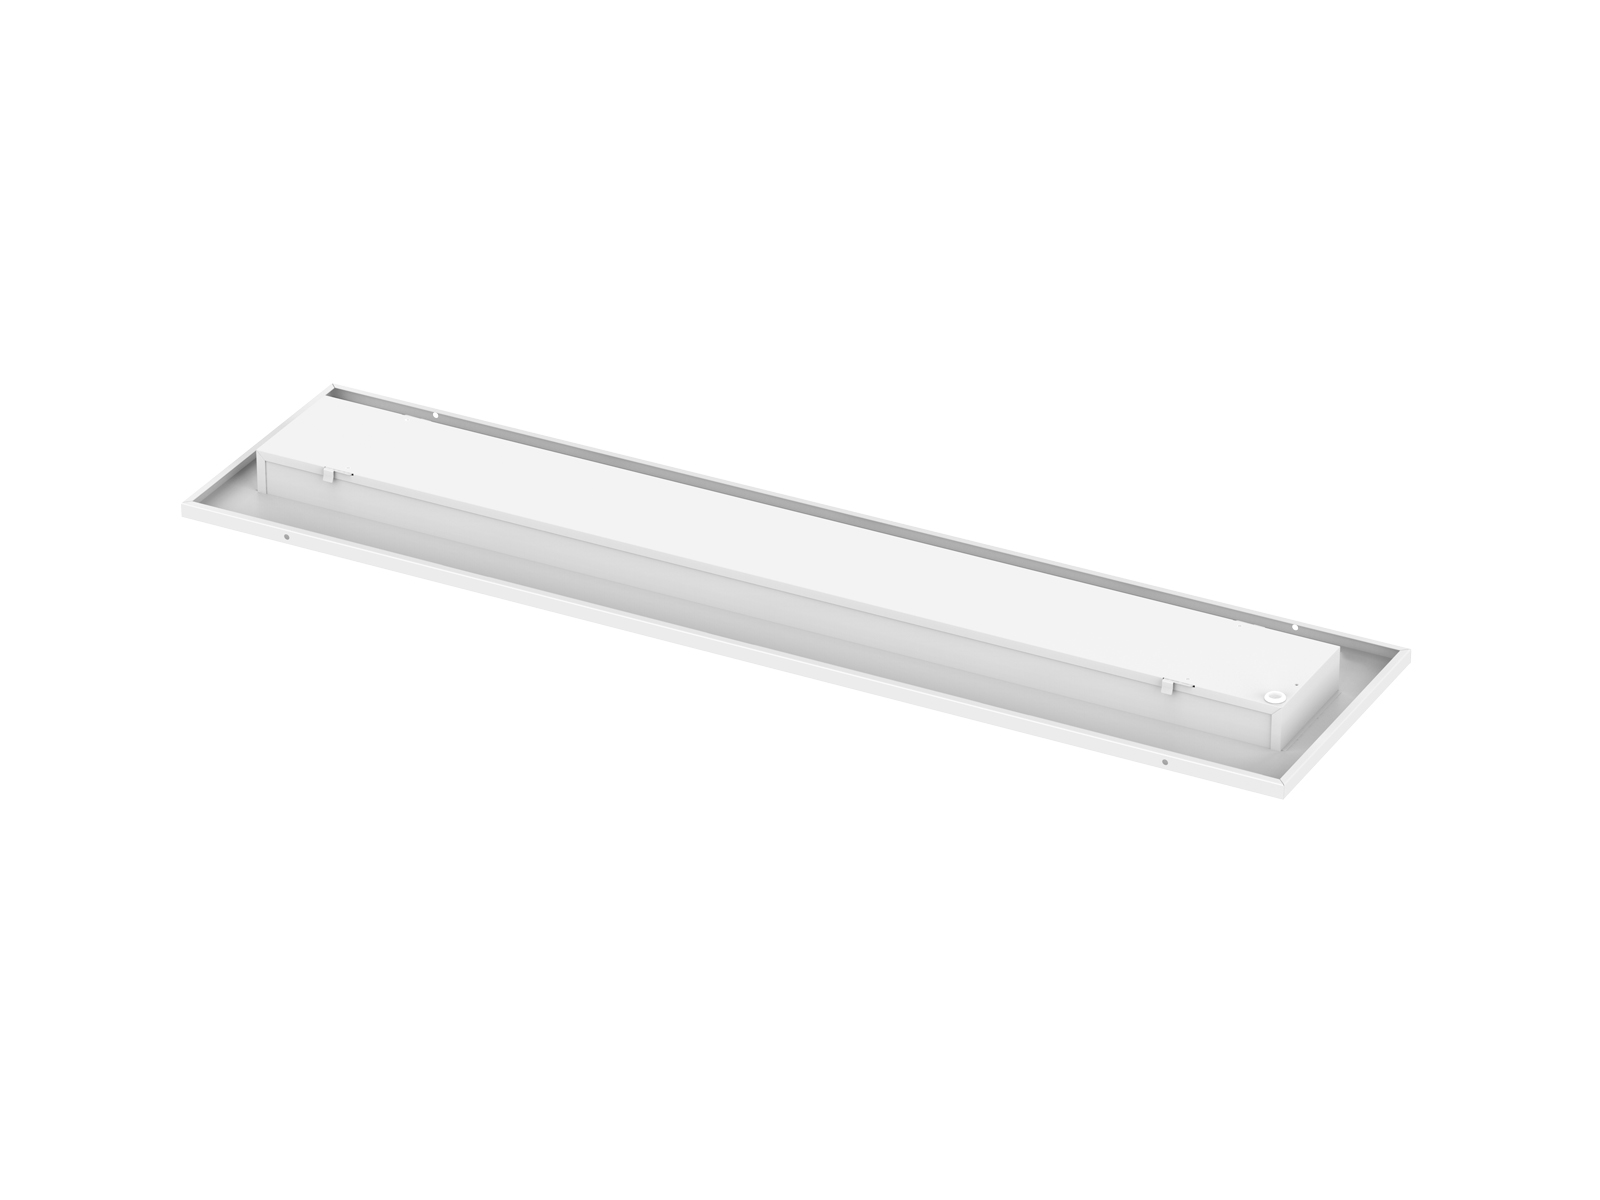 PL DE what is difference between led ceiling light vs panel light